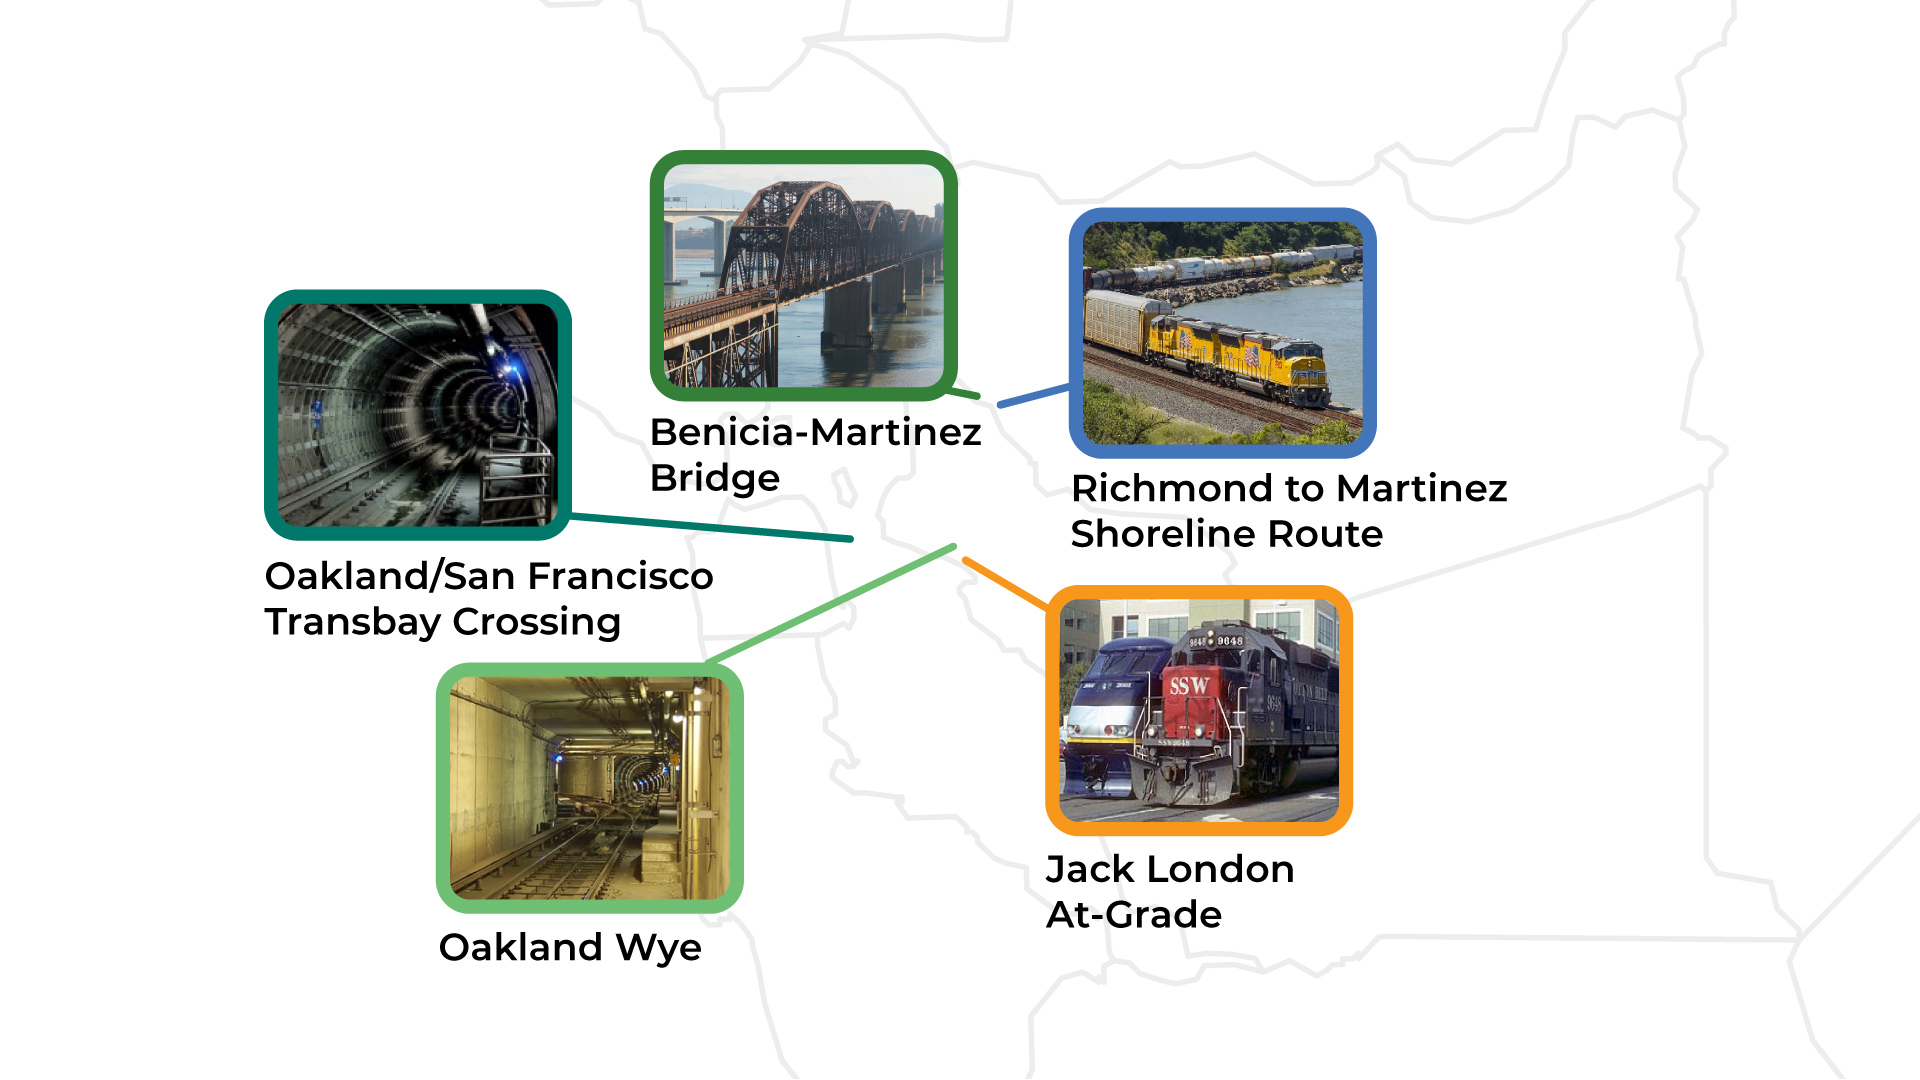 A series of thumbnails of trains, rail bridges, and tunnels in Oakland, Benicia, and San Francisco. 